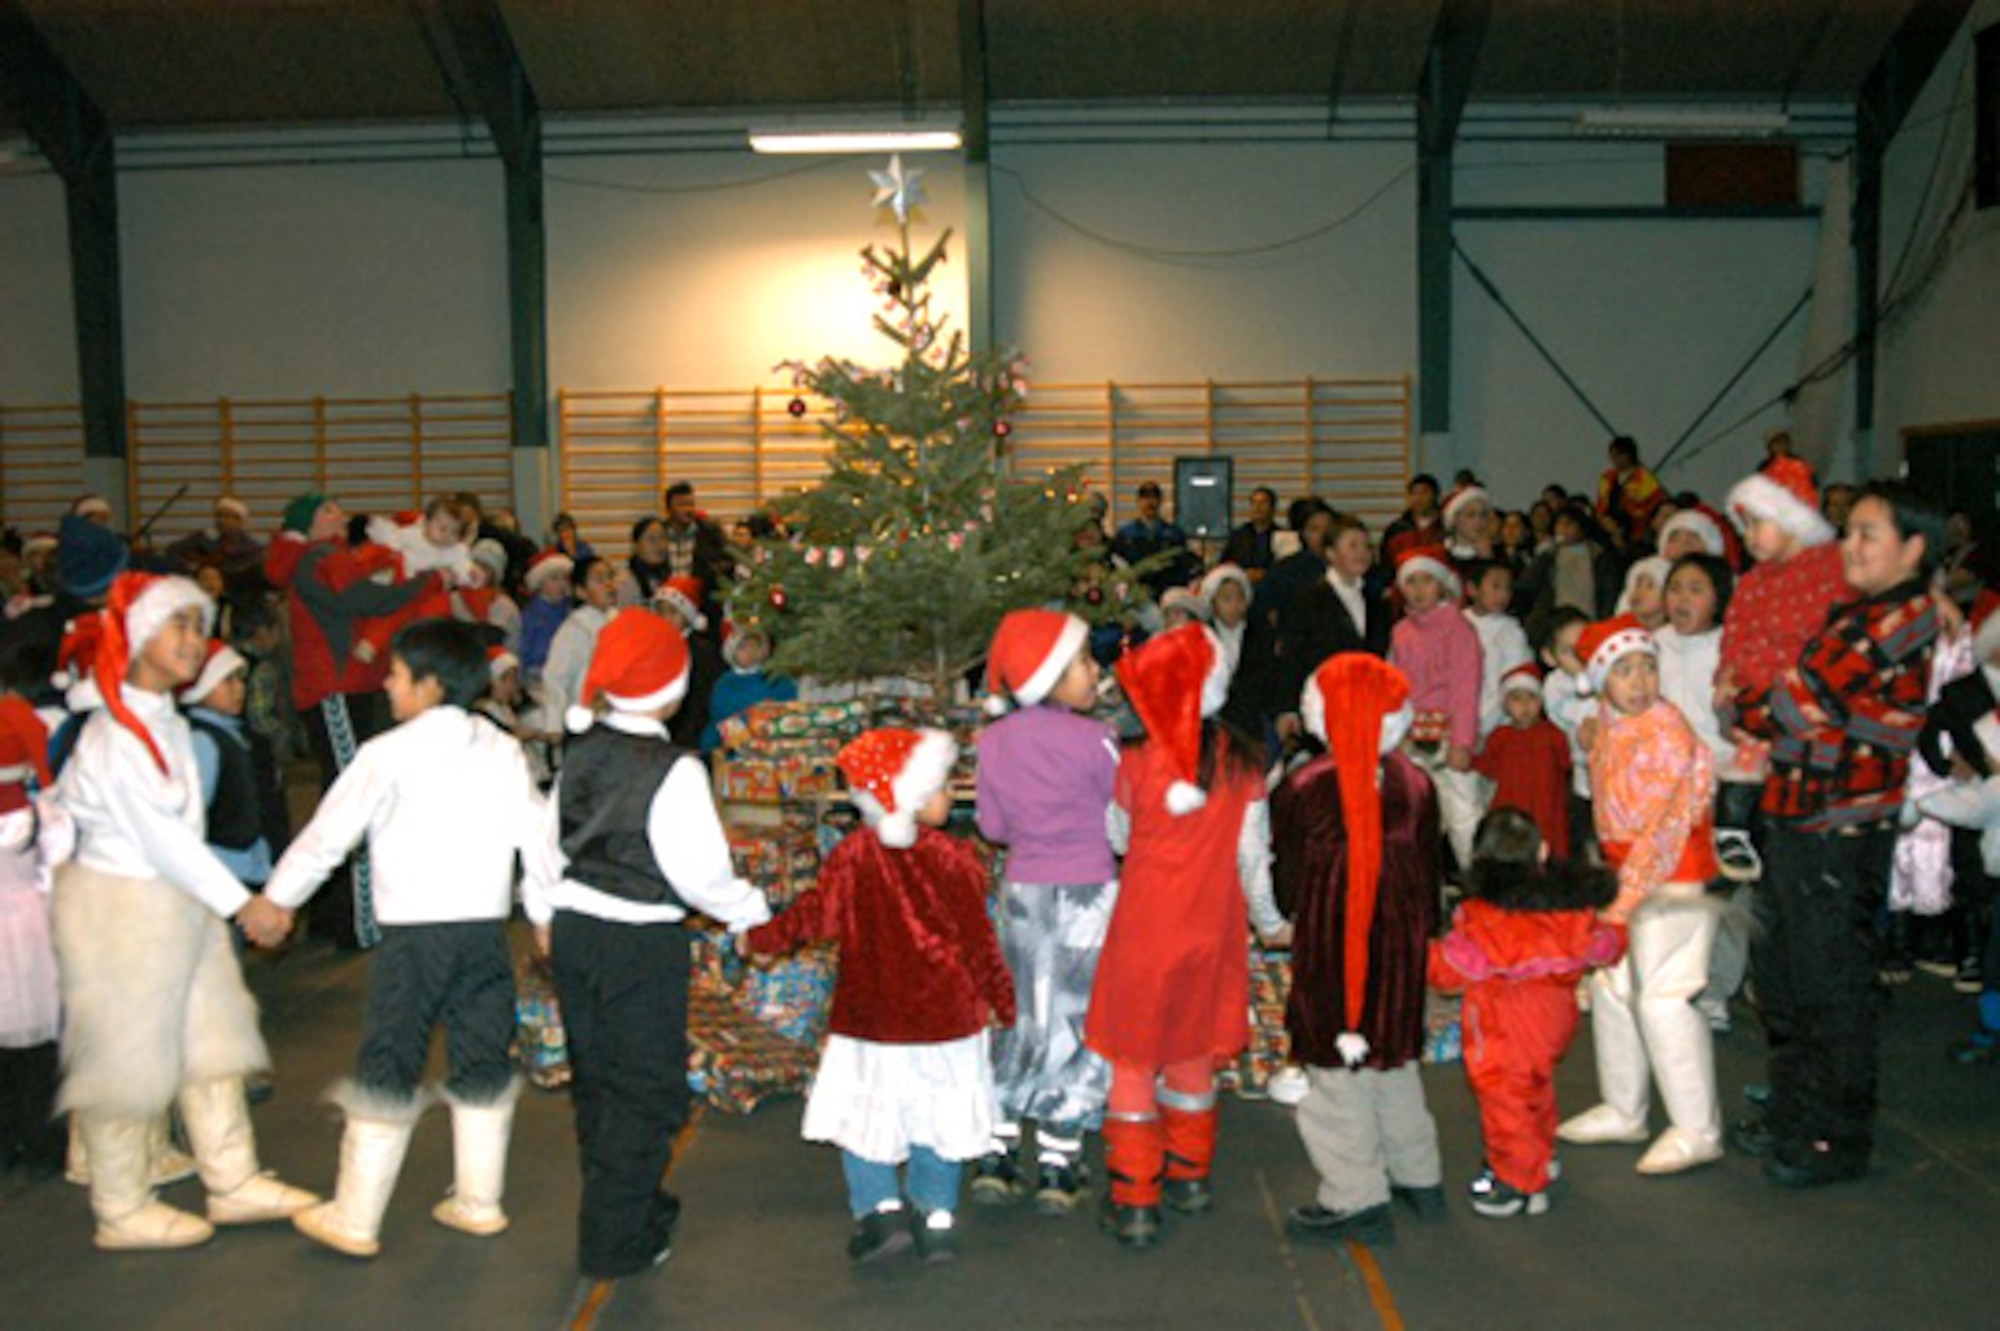 QAANAAQ, Greenland -- Children here dance around the Christmas tree just before opening gifts at the Julemand Celebration on Dec. 20.  The gifts were provided by the Airmen of Thule Air Base.  (U.S. Air Force photo by 1st Lt. Jennifer Tribble)  